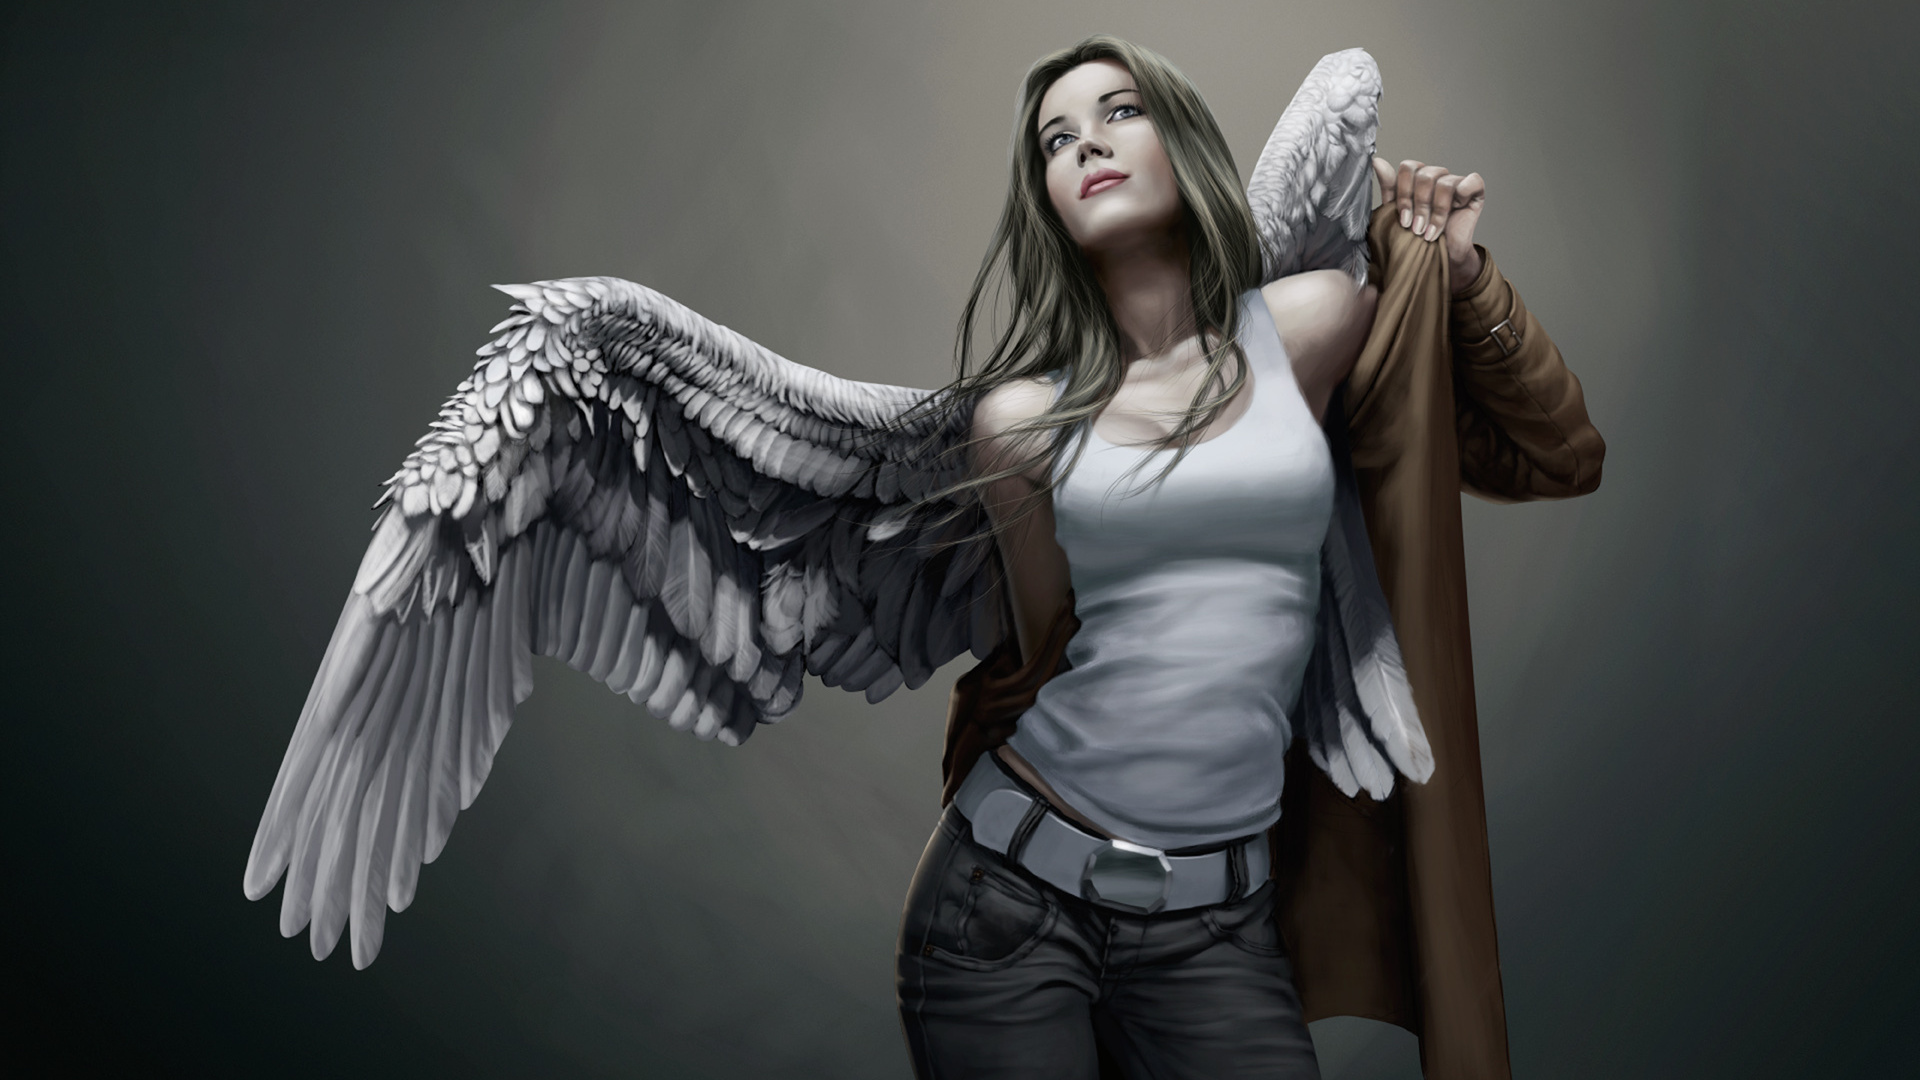 Woman in White Tank Top and Black Denim Jeans With White Wings. Wallpaper in 1920x1080 Resolution